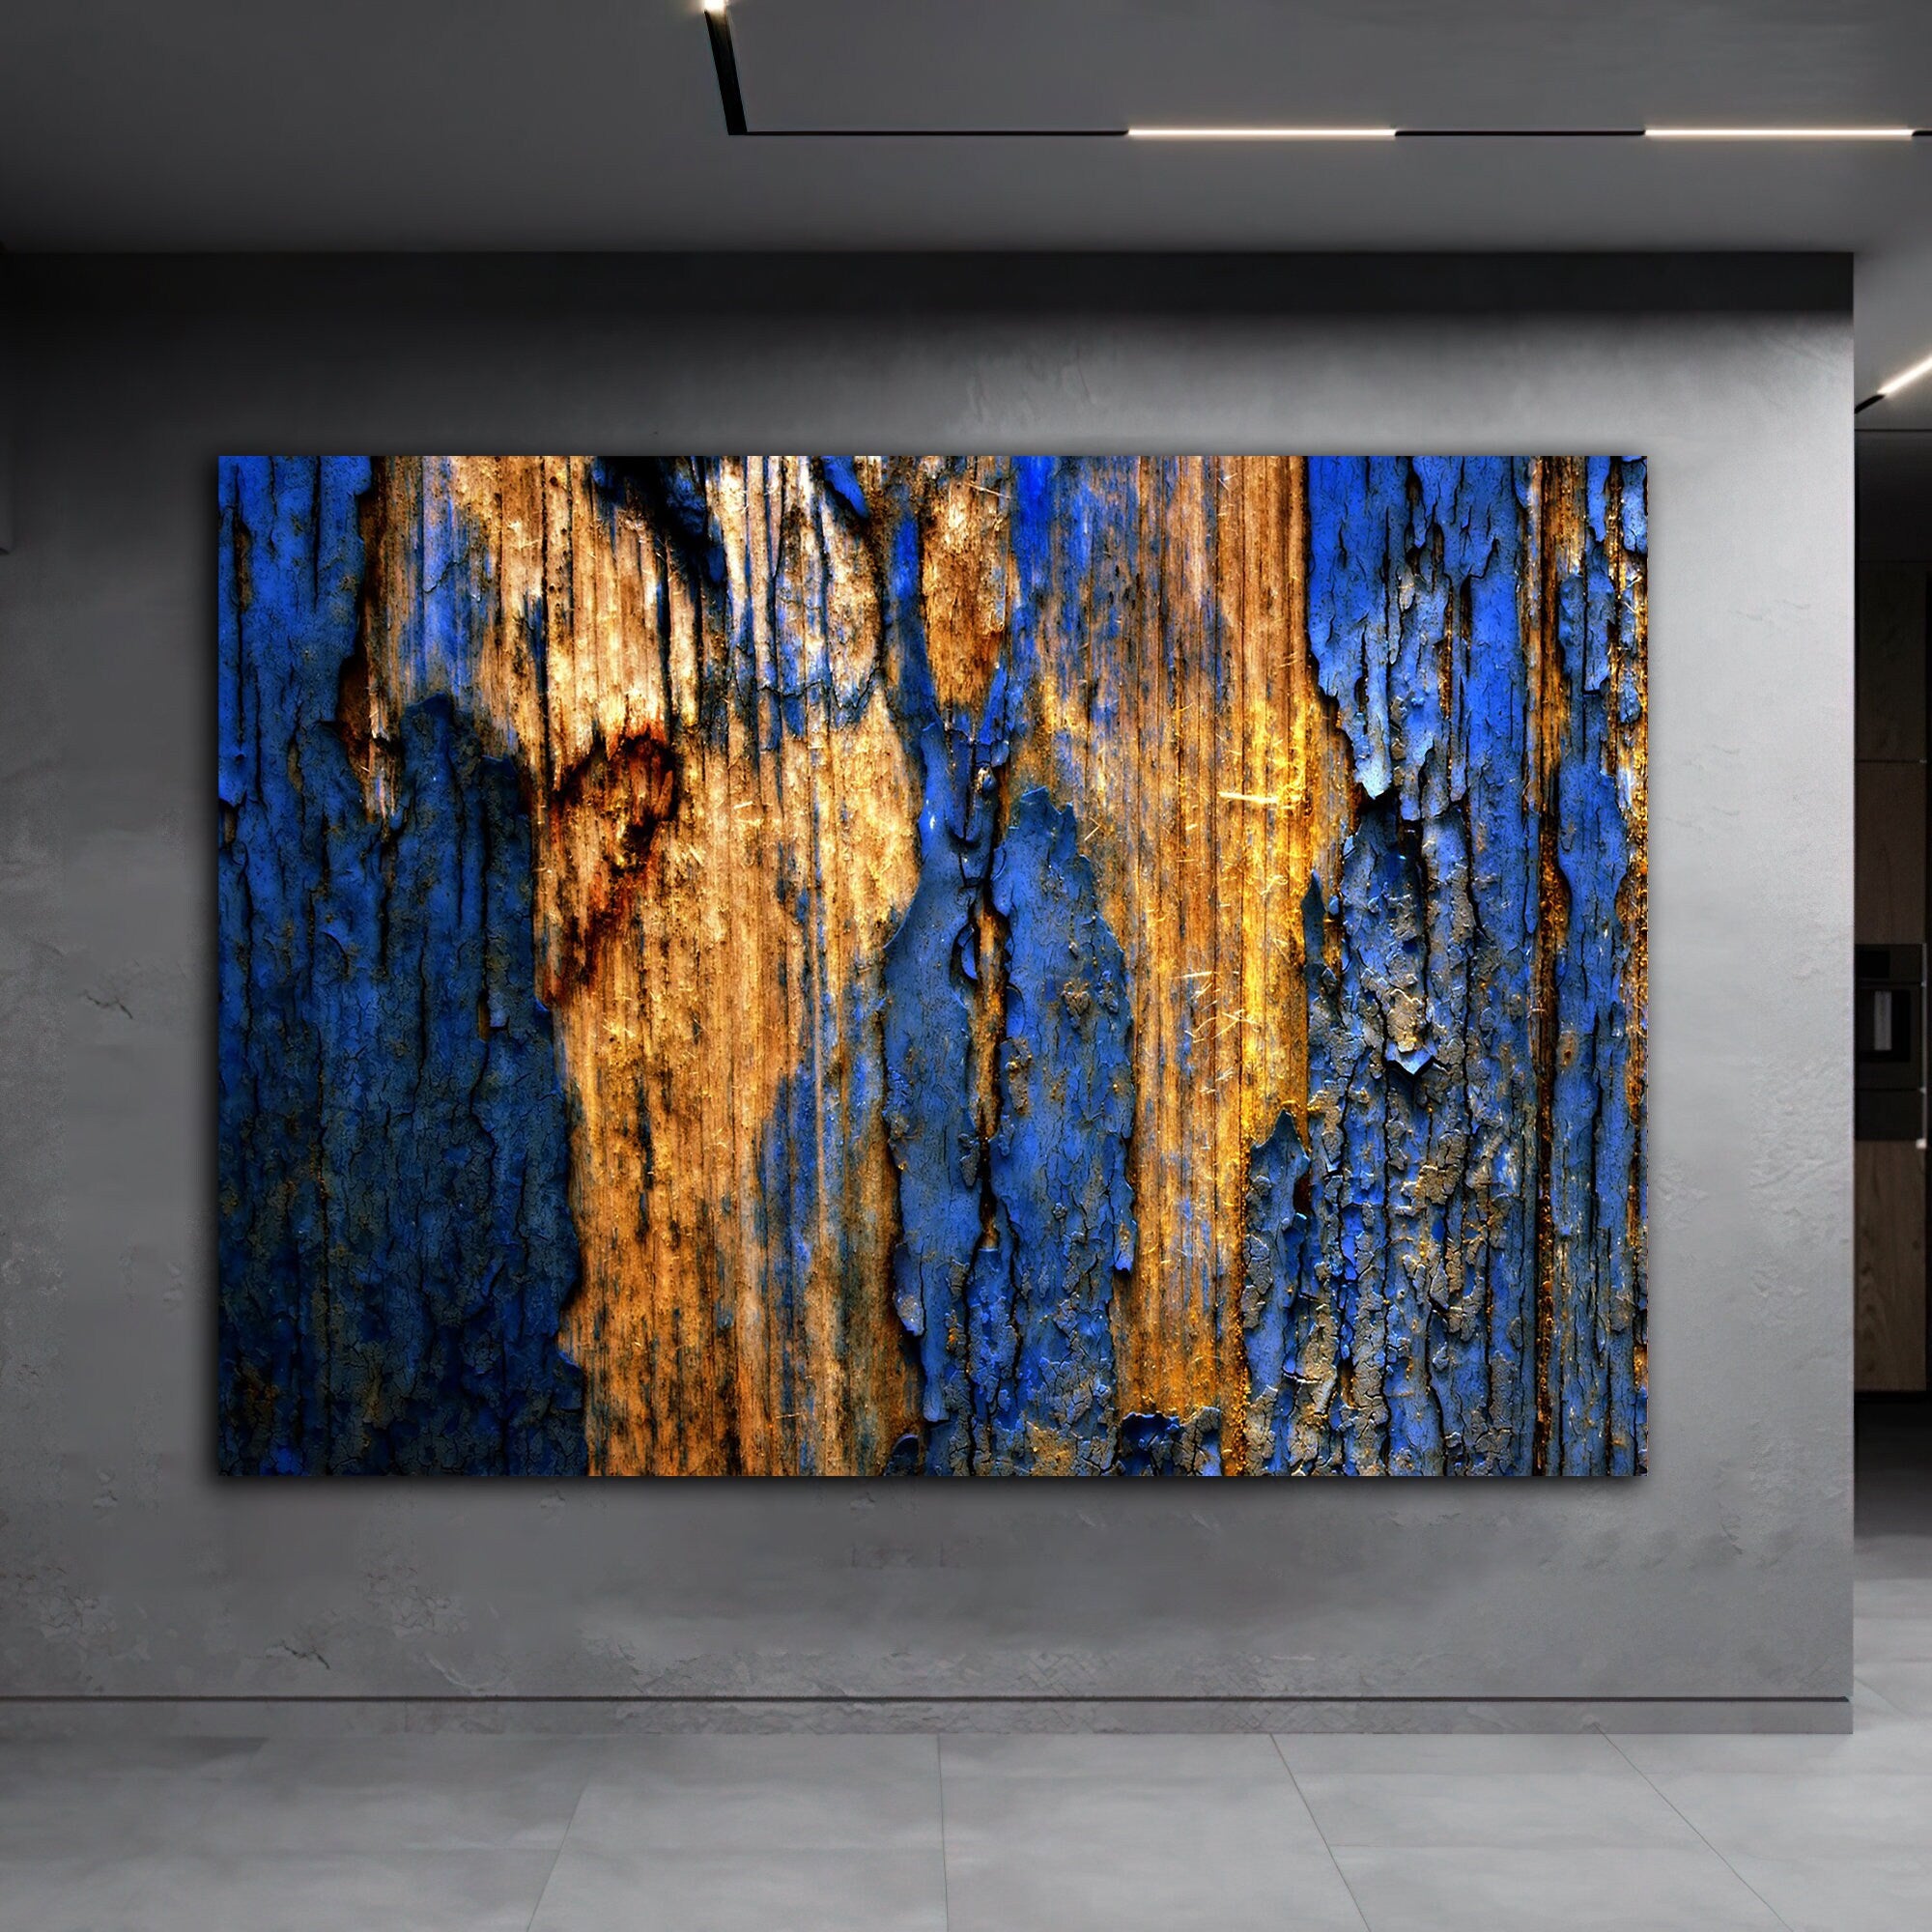 tree crack abstract canvas painting, wood look canvas painting, tree painting, cracks abstract canvas painting, wood pattern image painting Fine Art